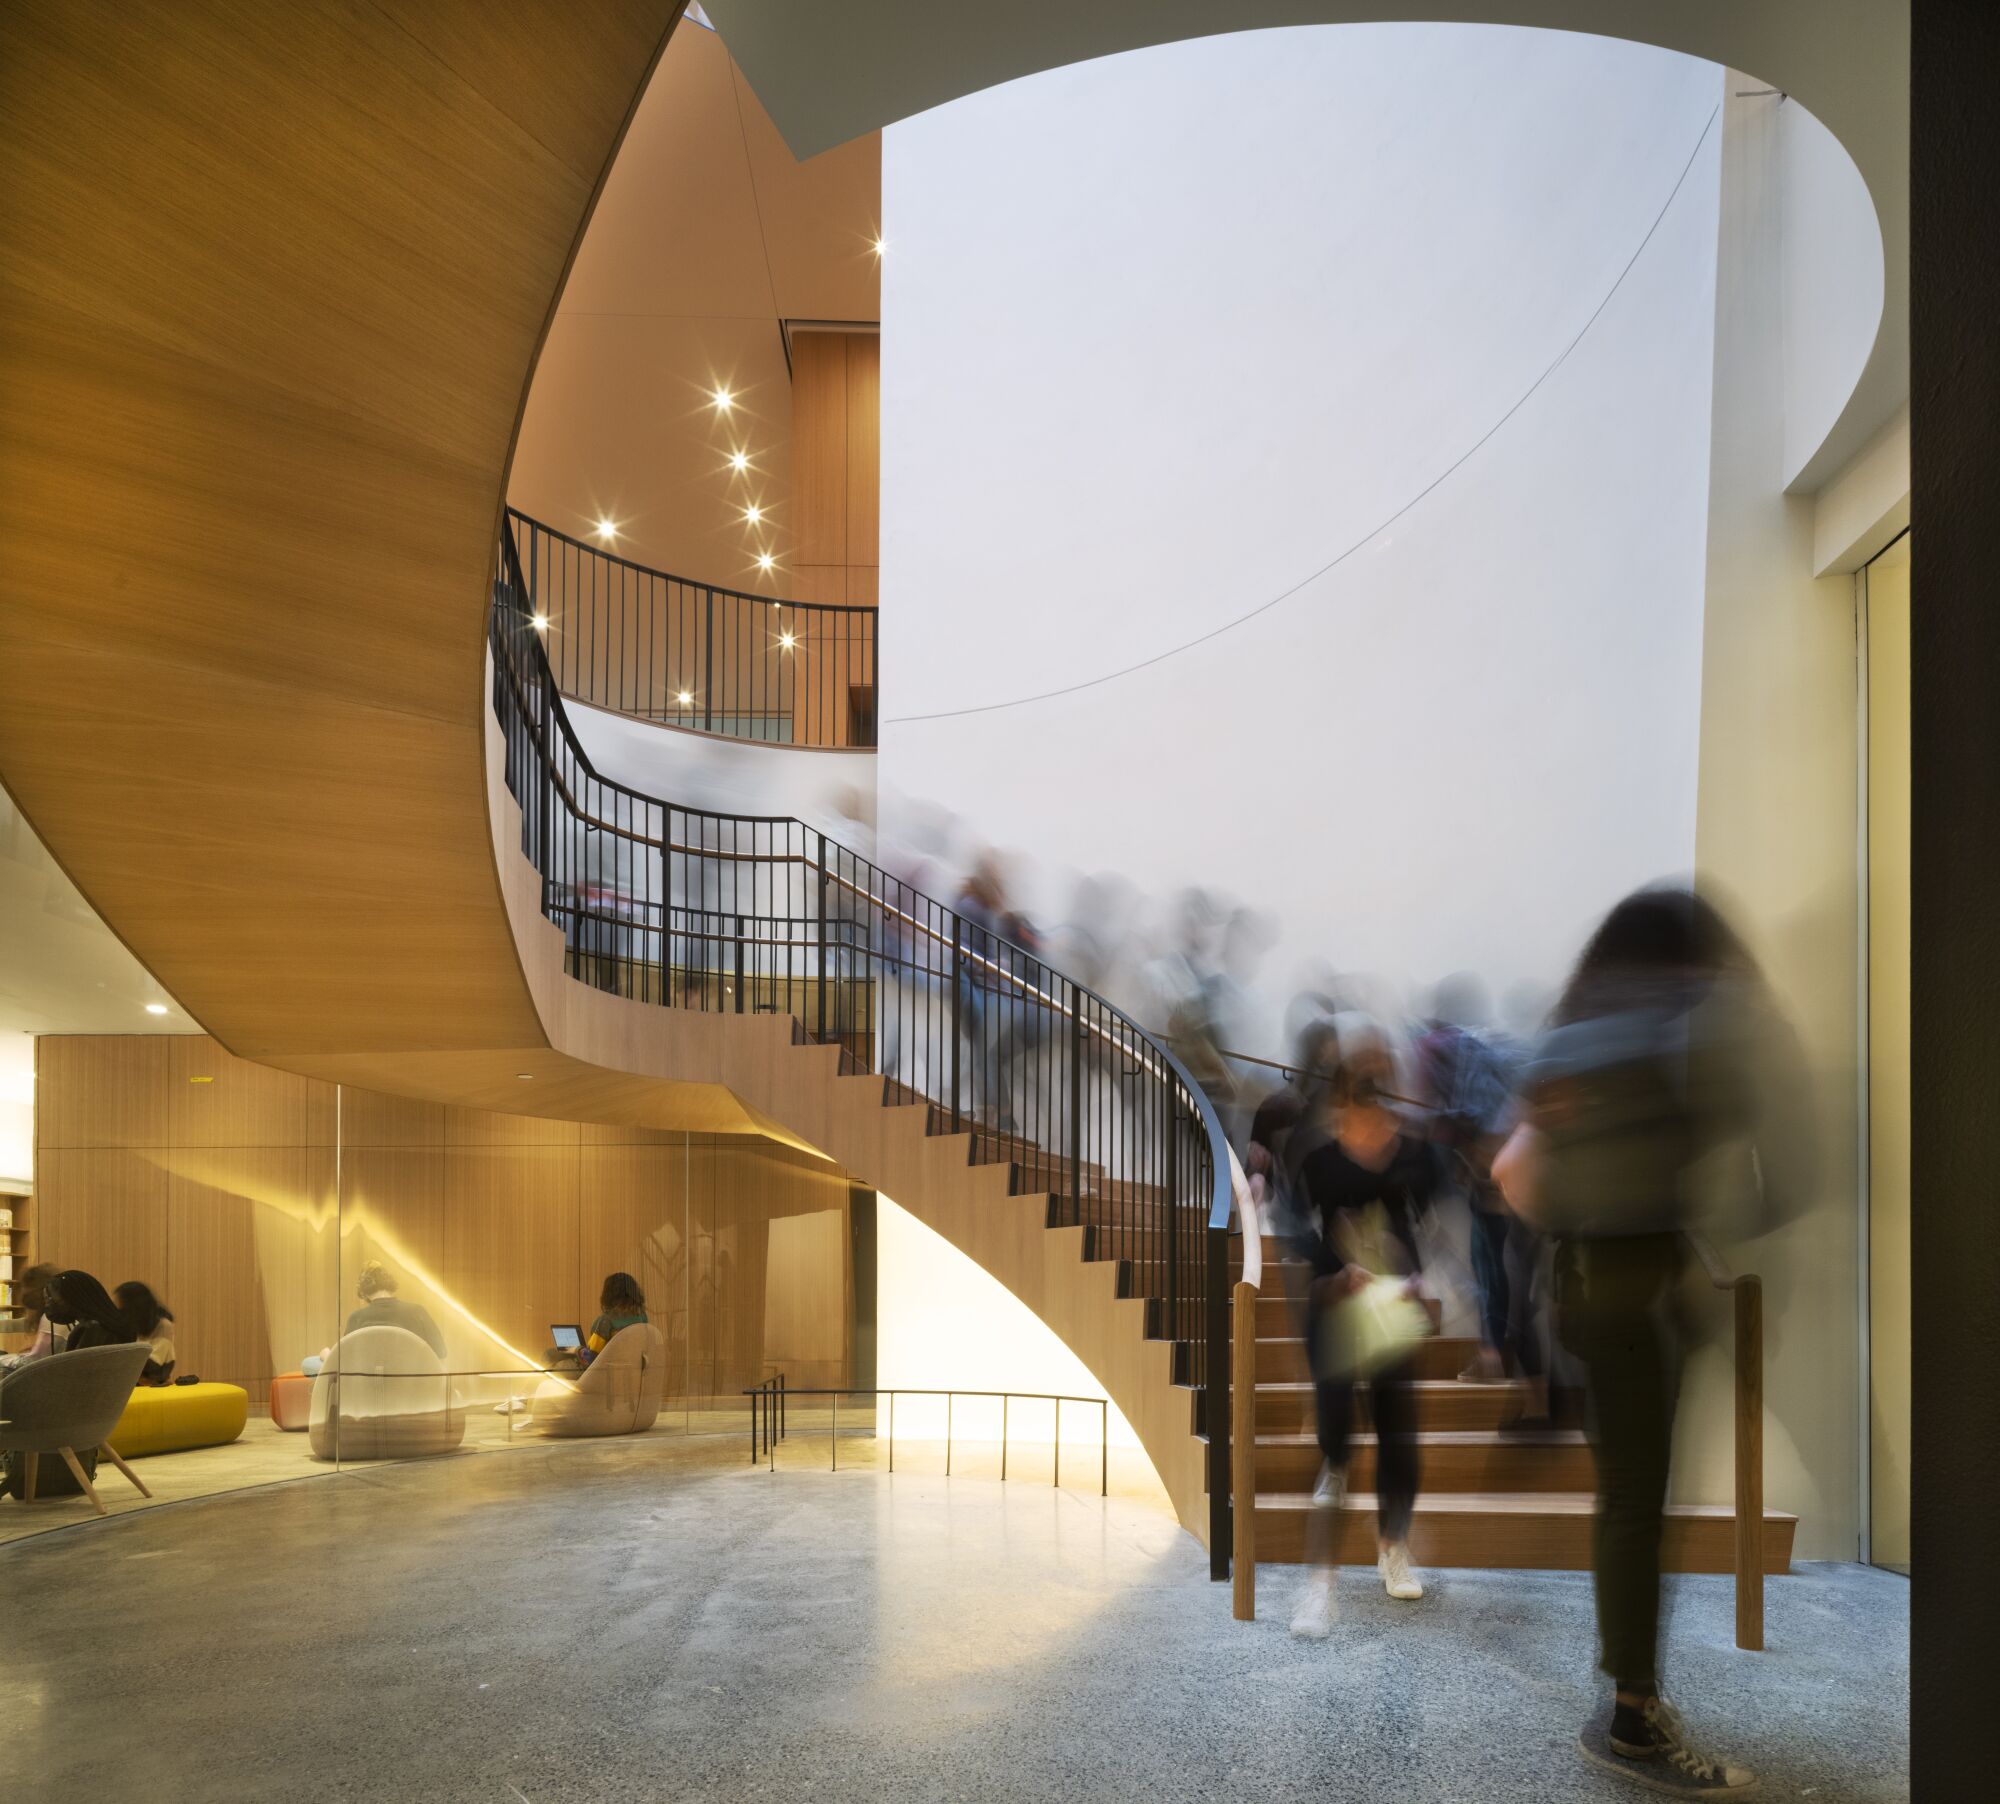 Blurred human figures descend a gently curving, wooden staircase.